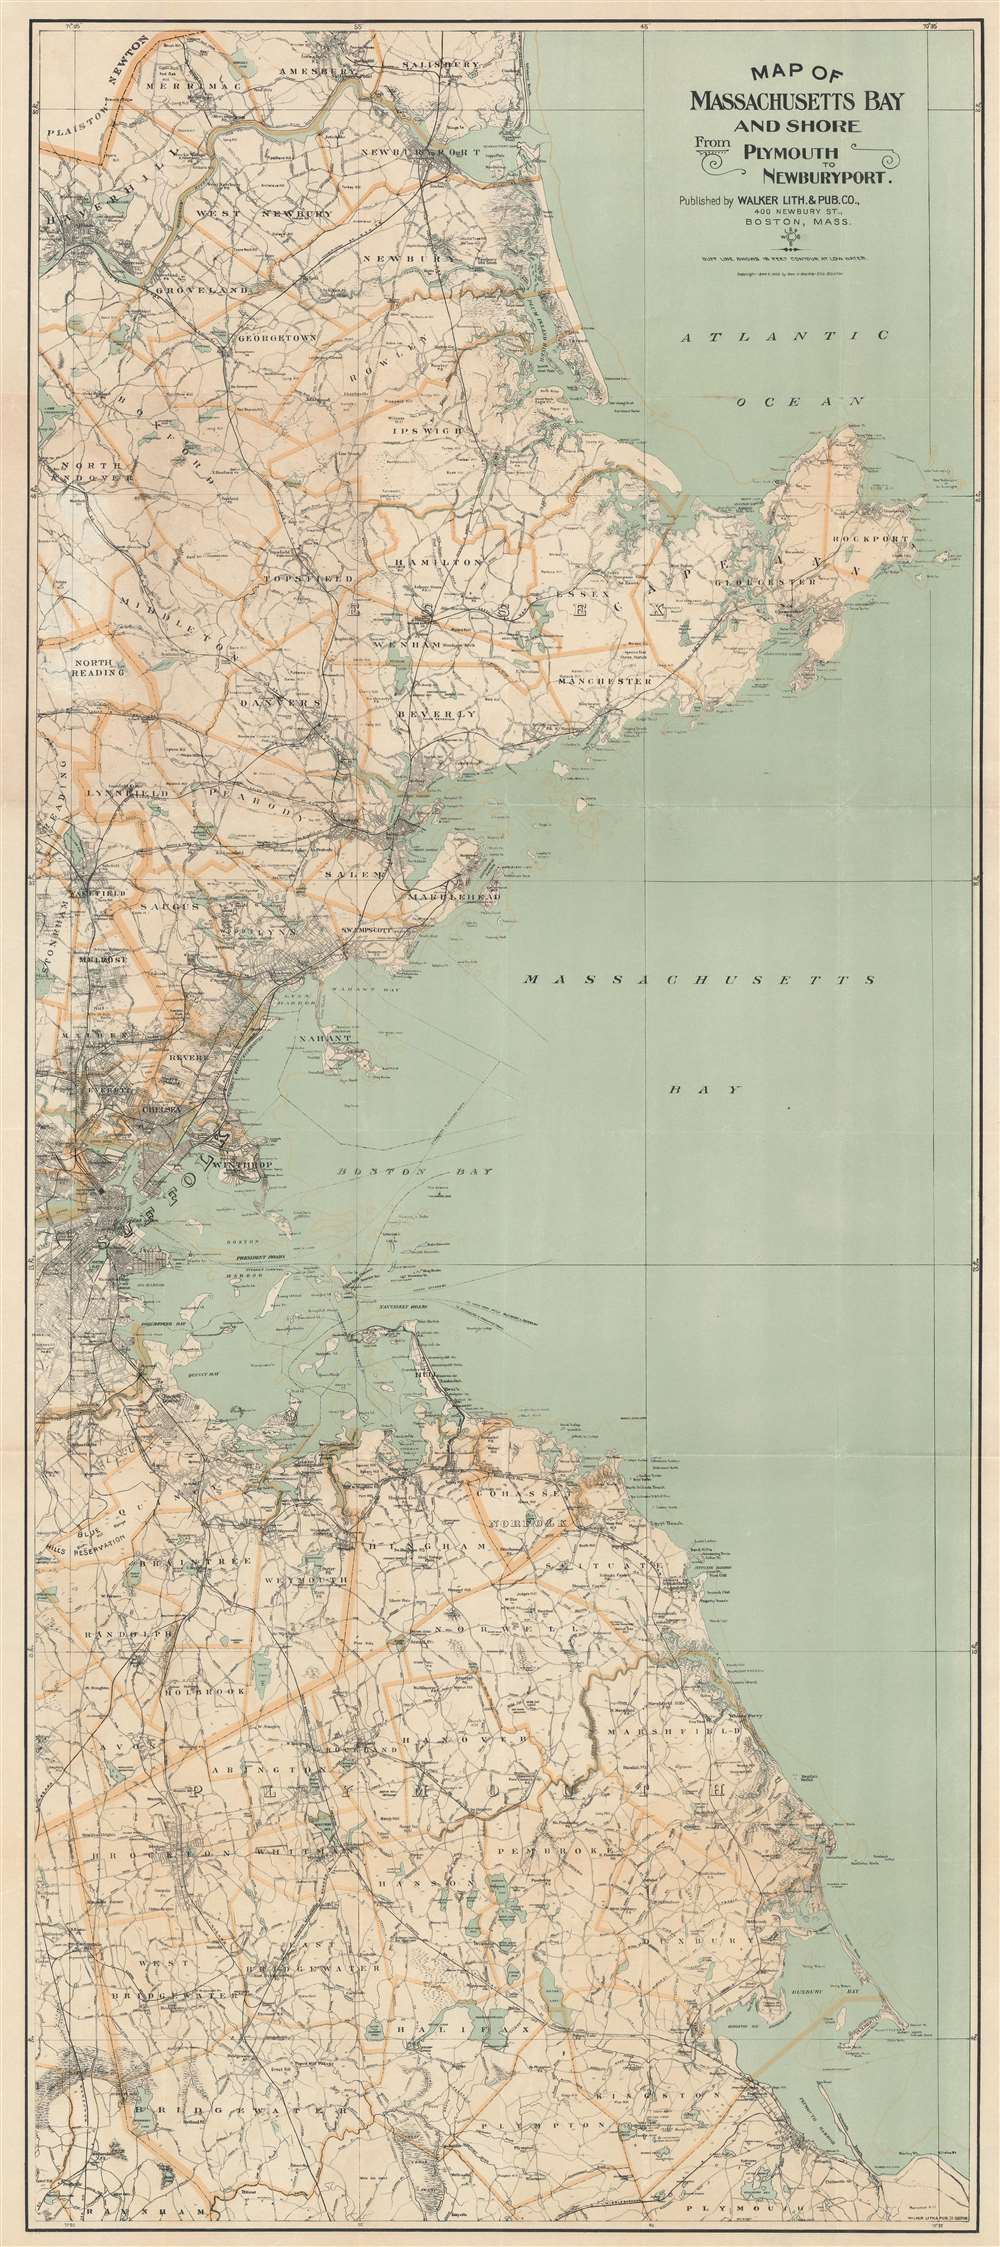 Map of Massachusetts Bay and Shore From Plymouth to Newburyport. - Main View